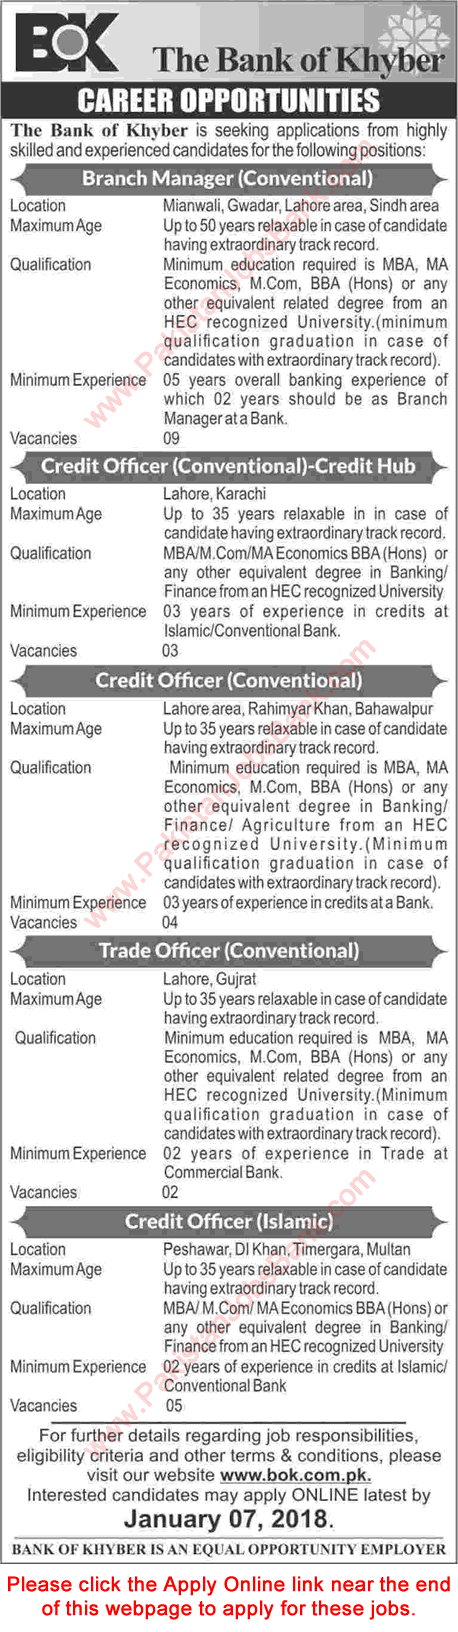 Bank of Khyber Jobs December 2017 Apply Online Credit / Trade Officers & Branch Managers Latest